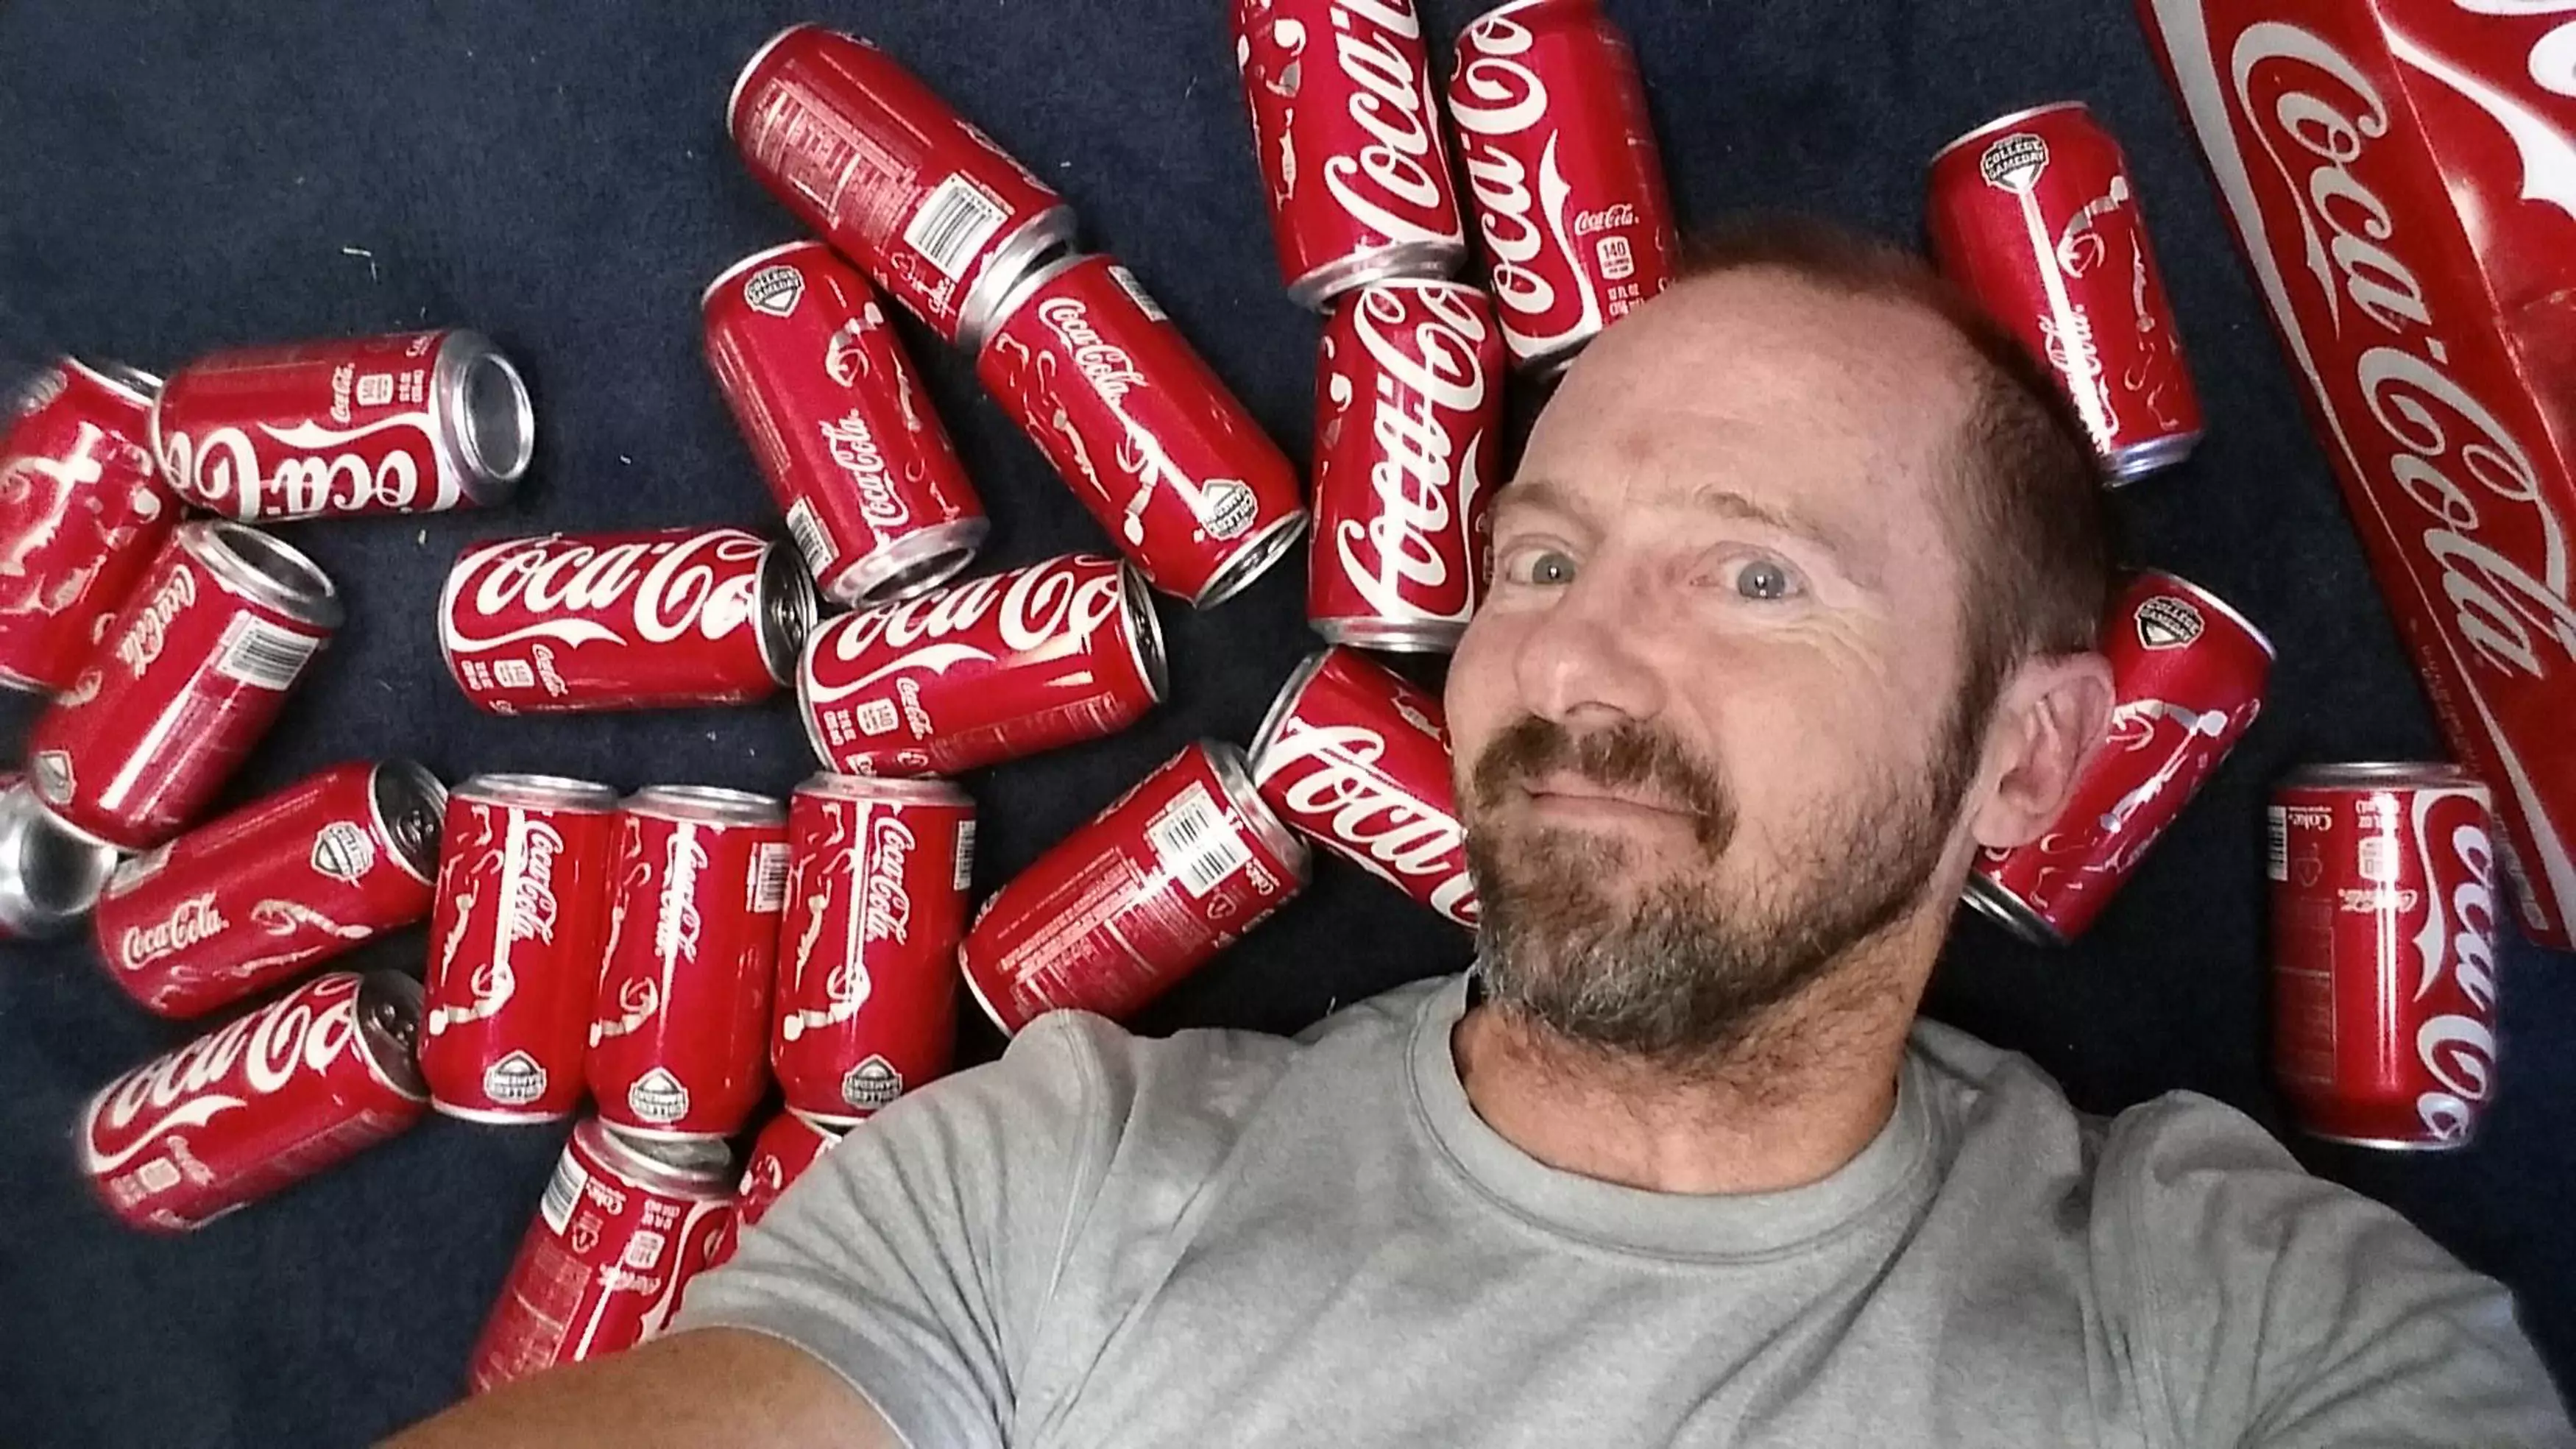 Guy Decides To Drink 10 Cokes A Day To See The Results